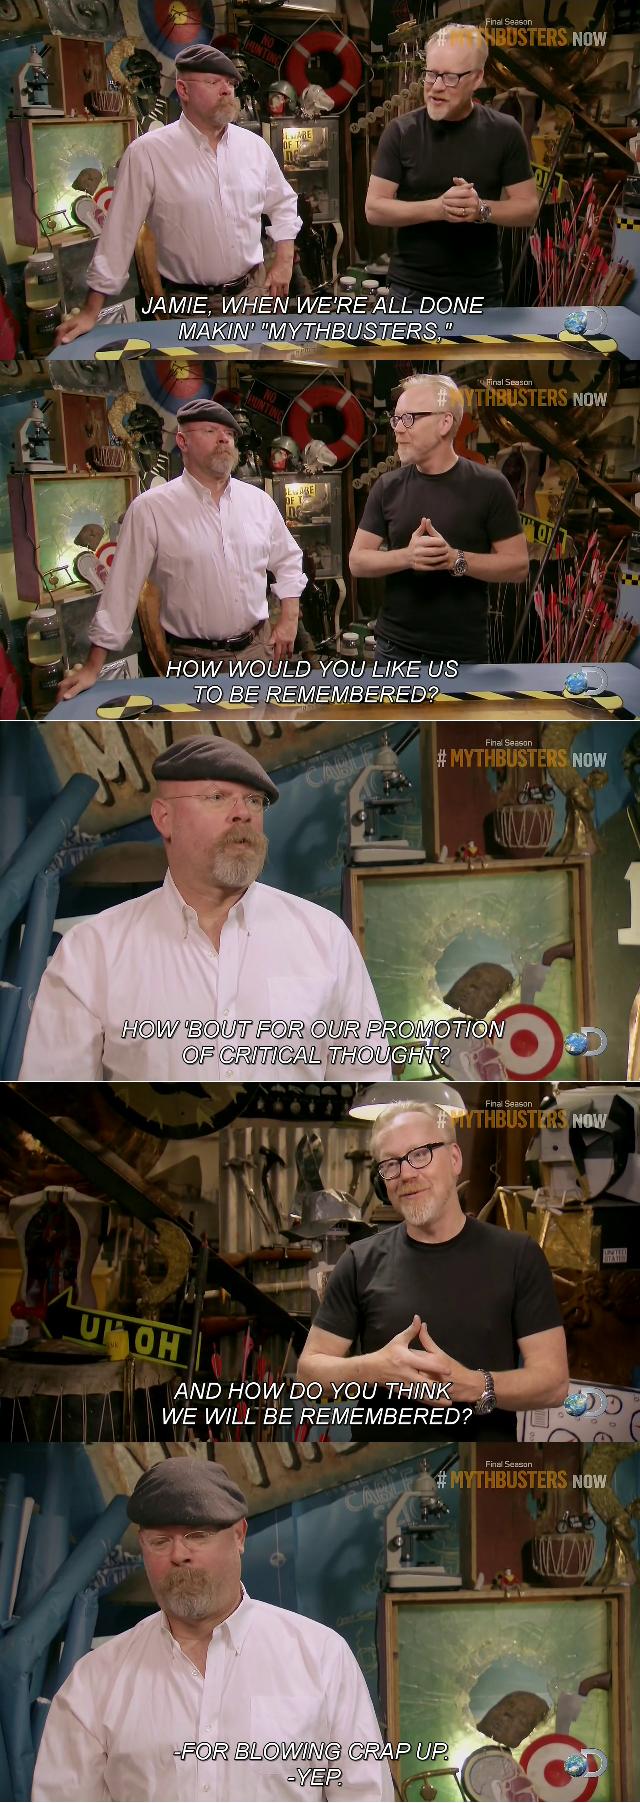 Mythbusters%3A+How+do+you+think+we+will+be+remembered%3F